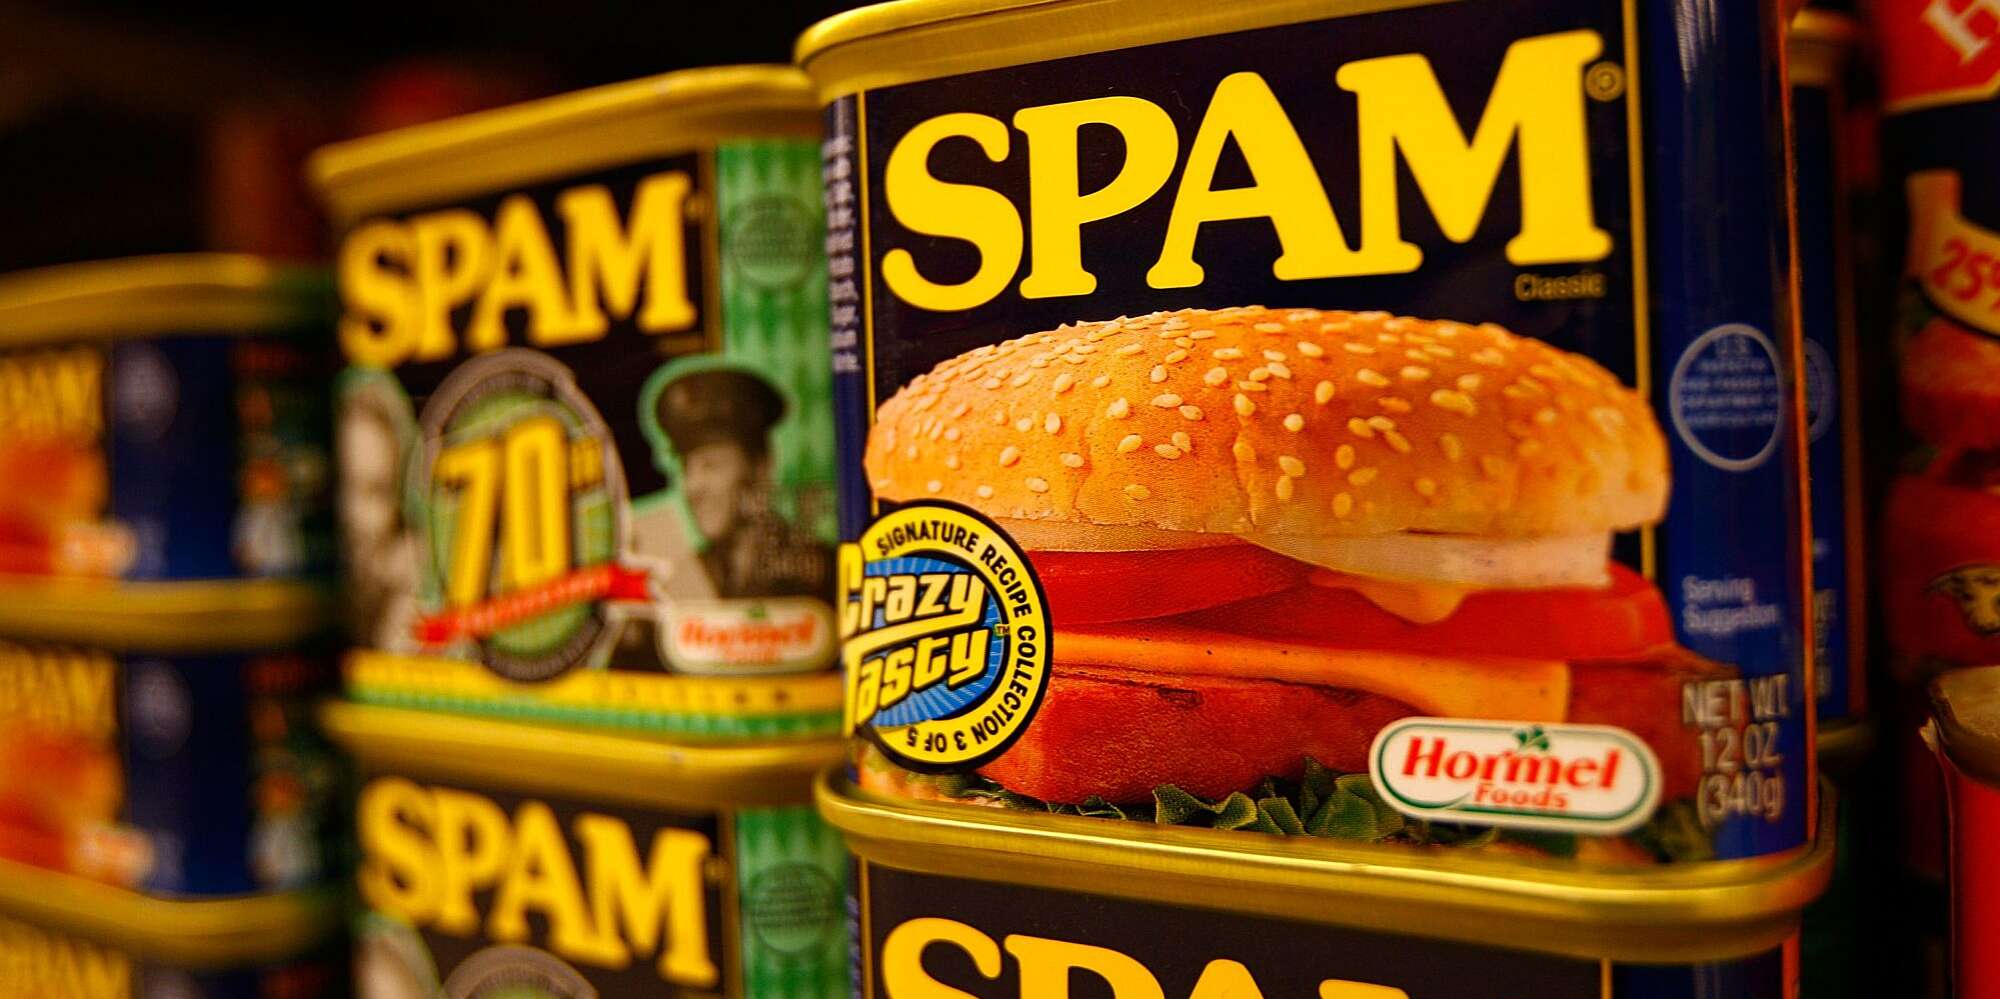 We Tasted and Ranked 12 Flavors of SPAM—Here Are the Results - Hormel Foods